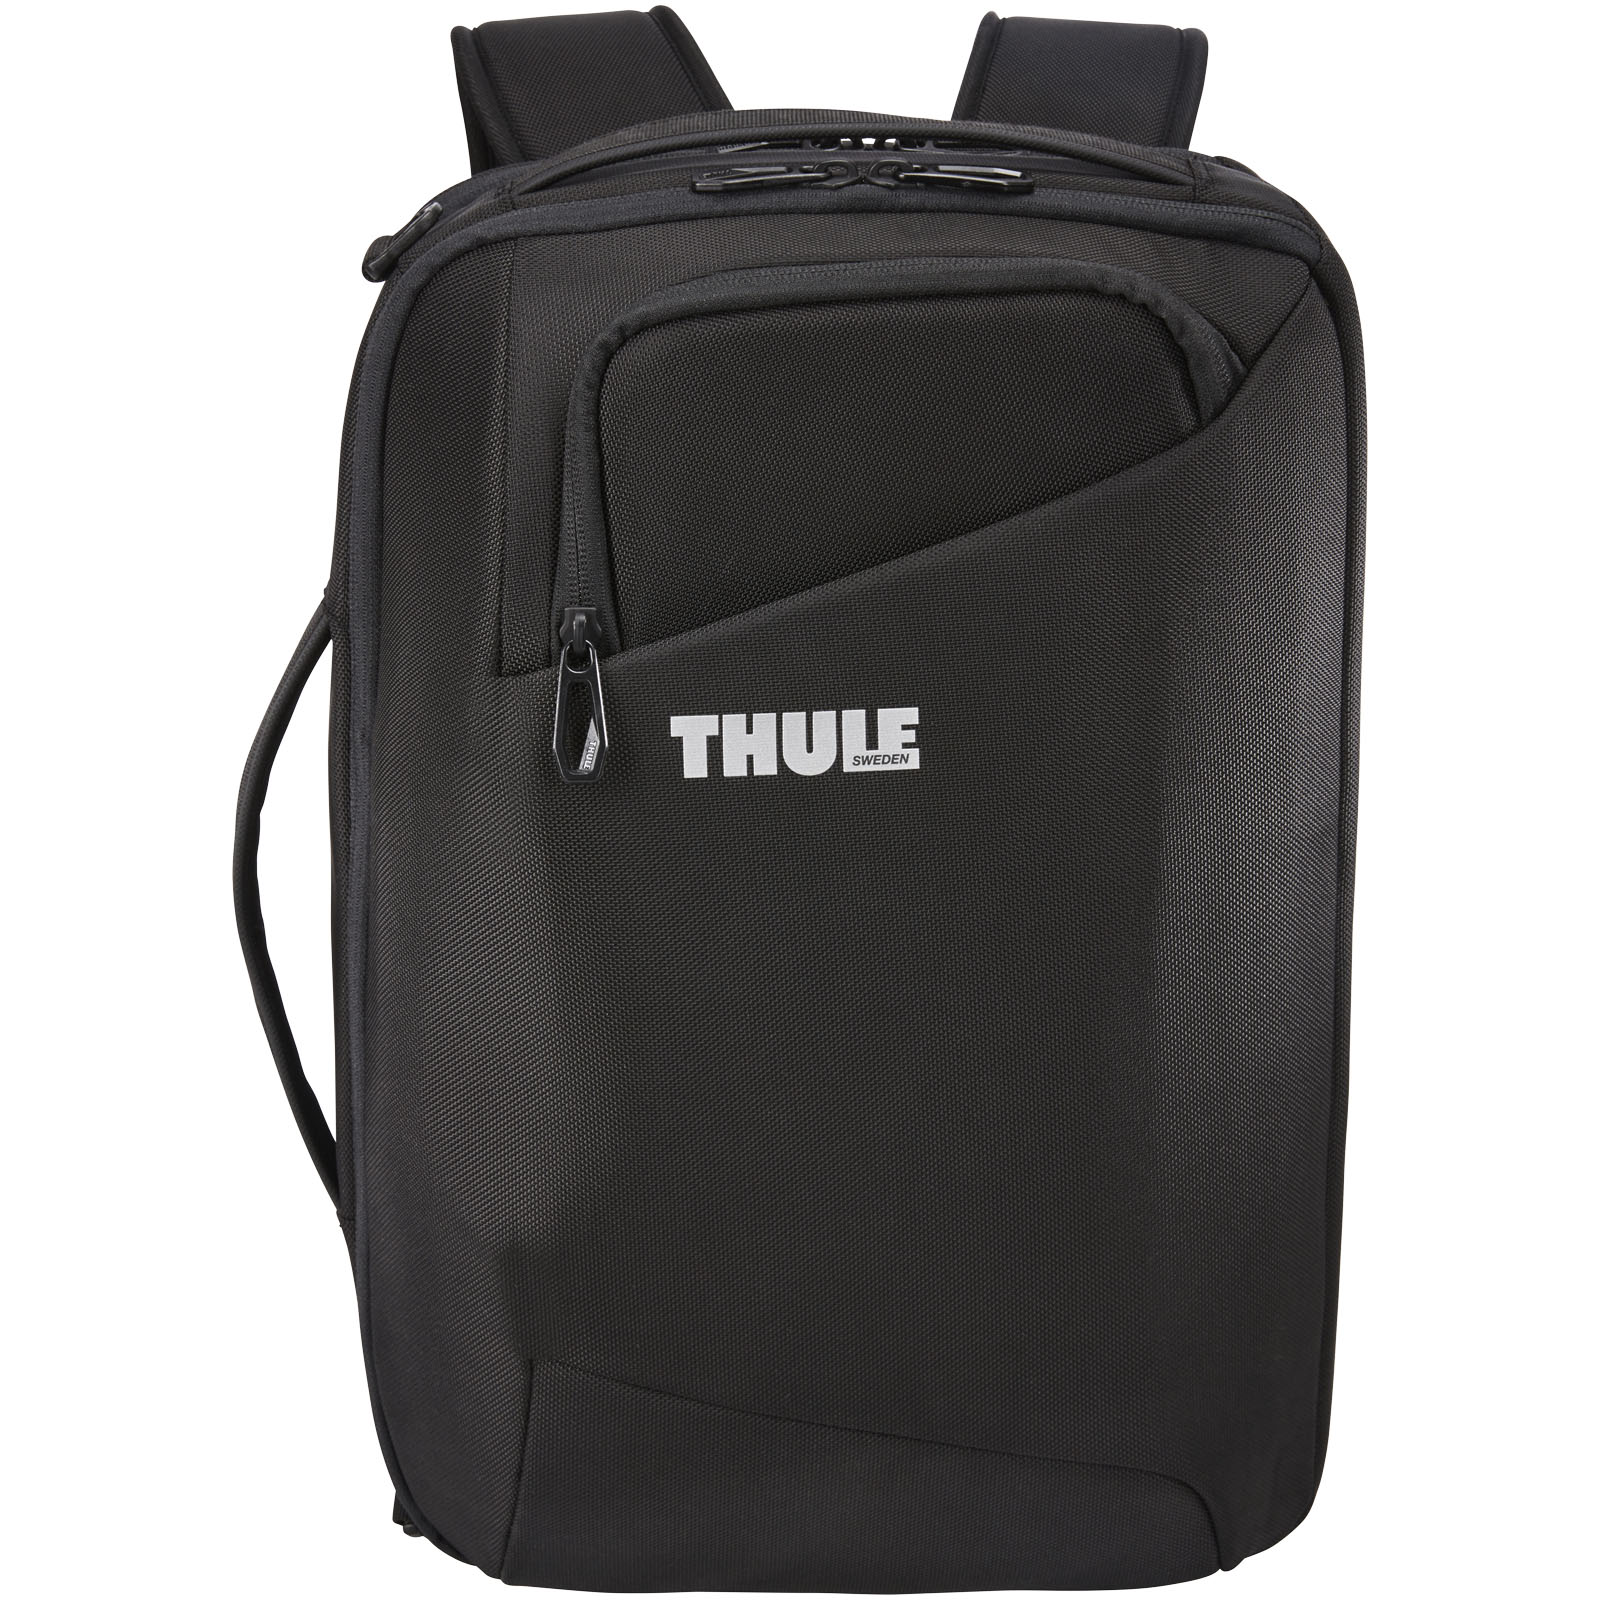 Advertising Backpacks - Thule Accent convertible backpack 17L - 1